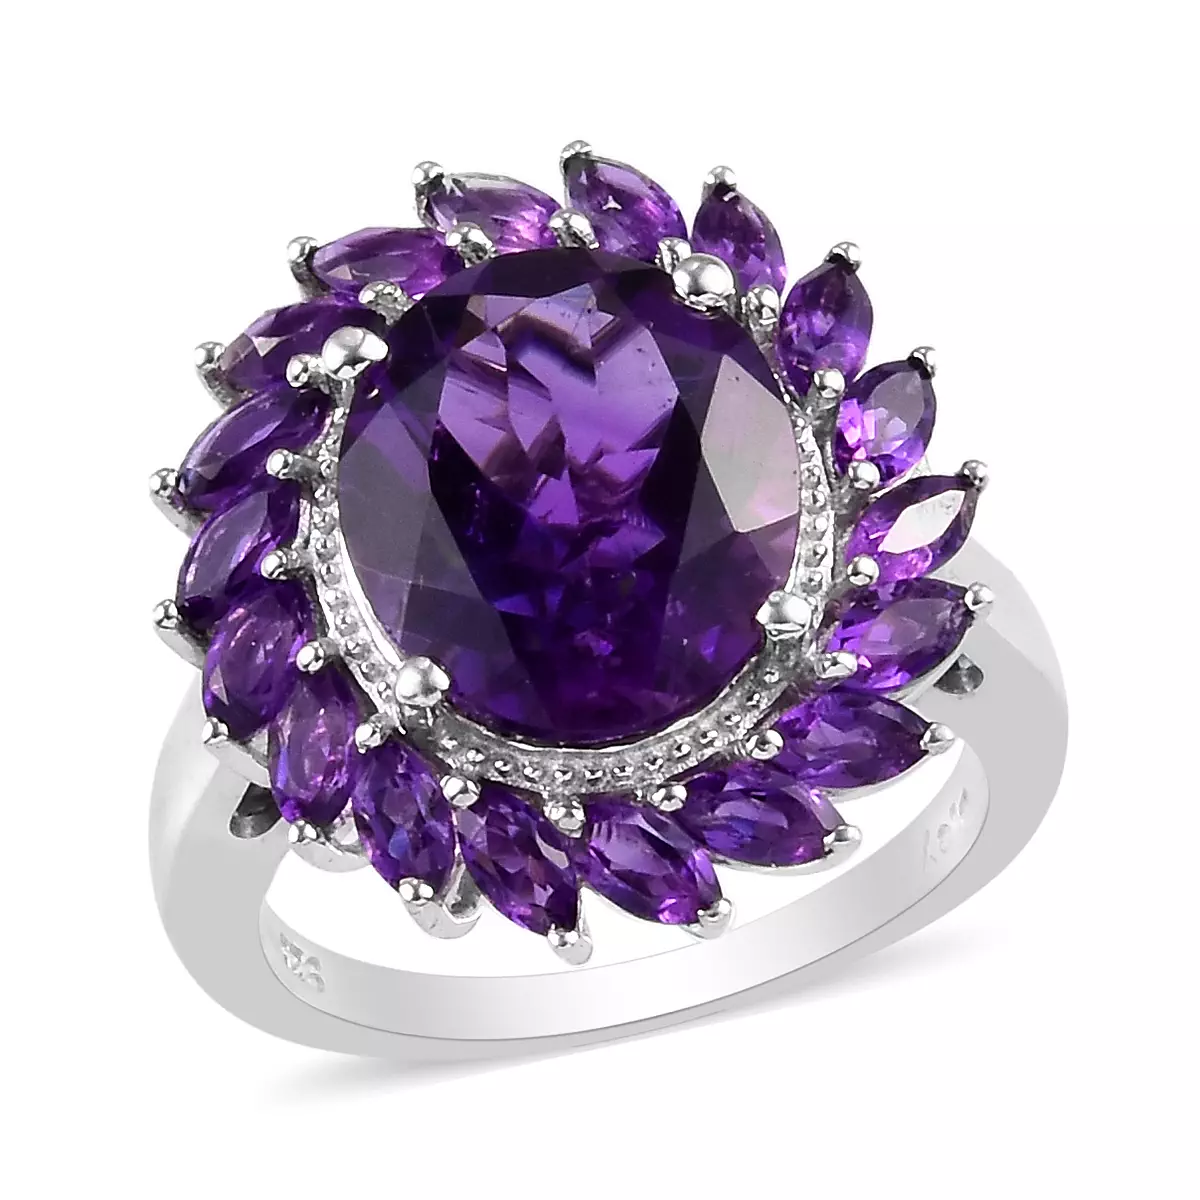 AMETHYST RINGS, THE SECRET HISTORY: SYMBOL OF MAGIC, LOVE, AND MORE ...